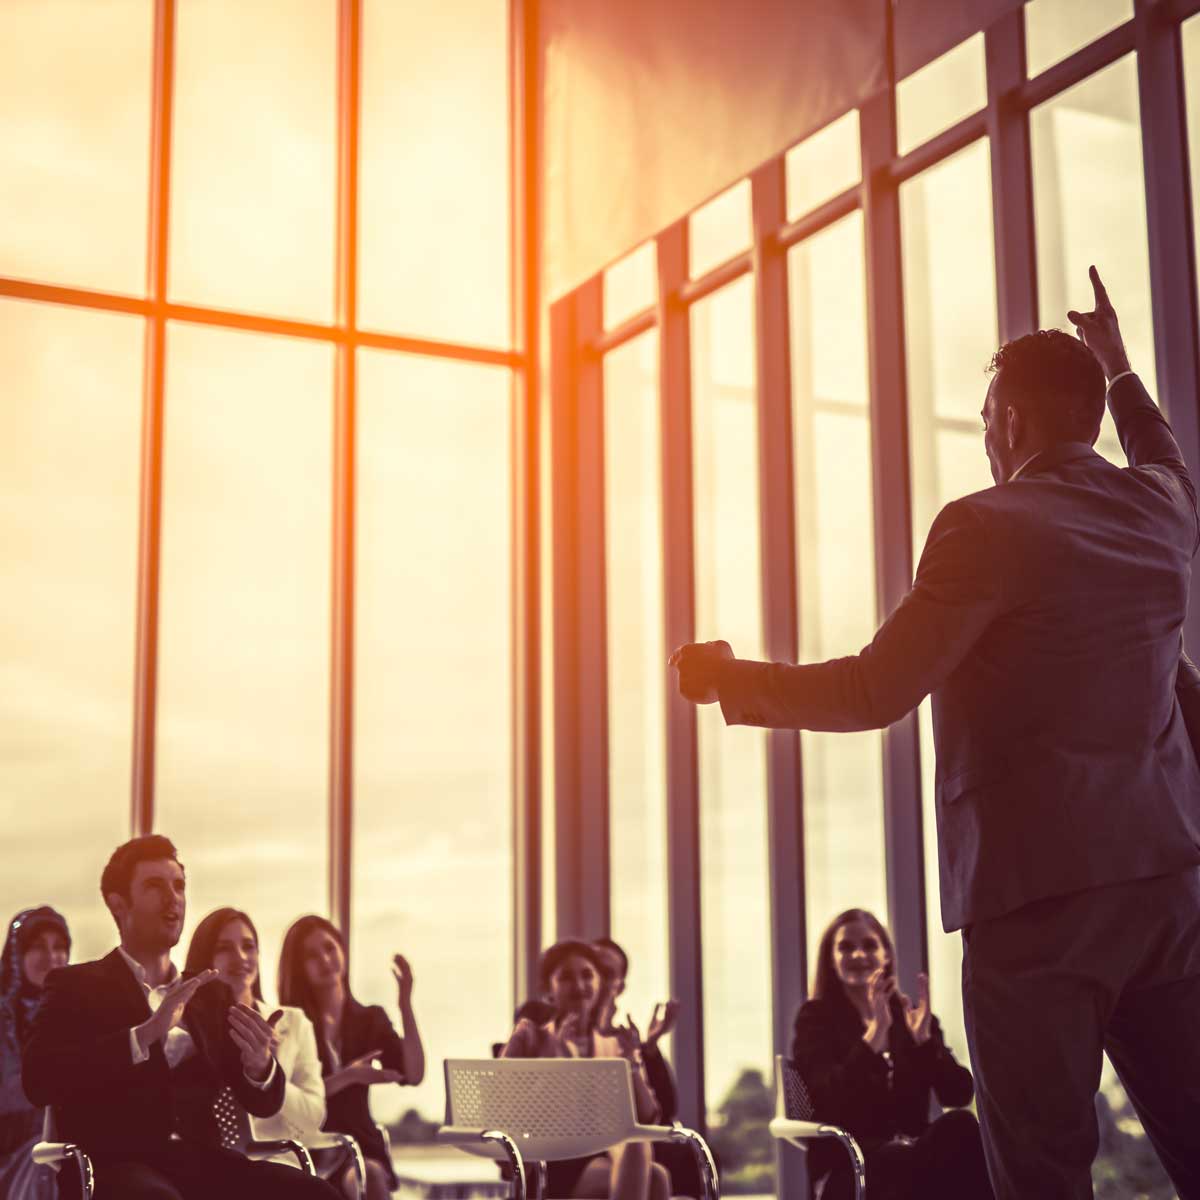 business leader presenting to crowd in room with glass windows and sun setting